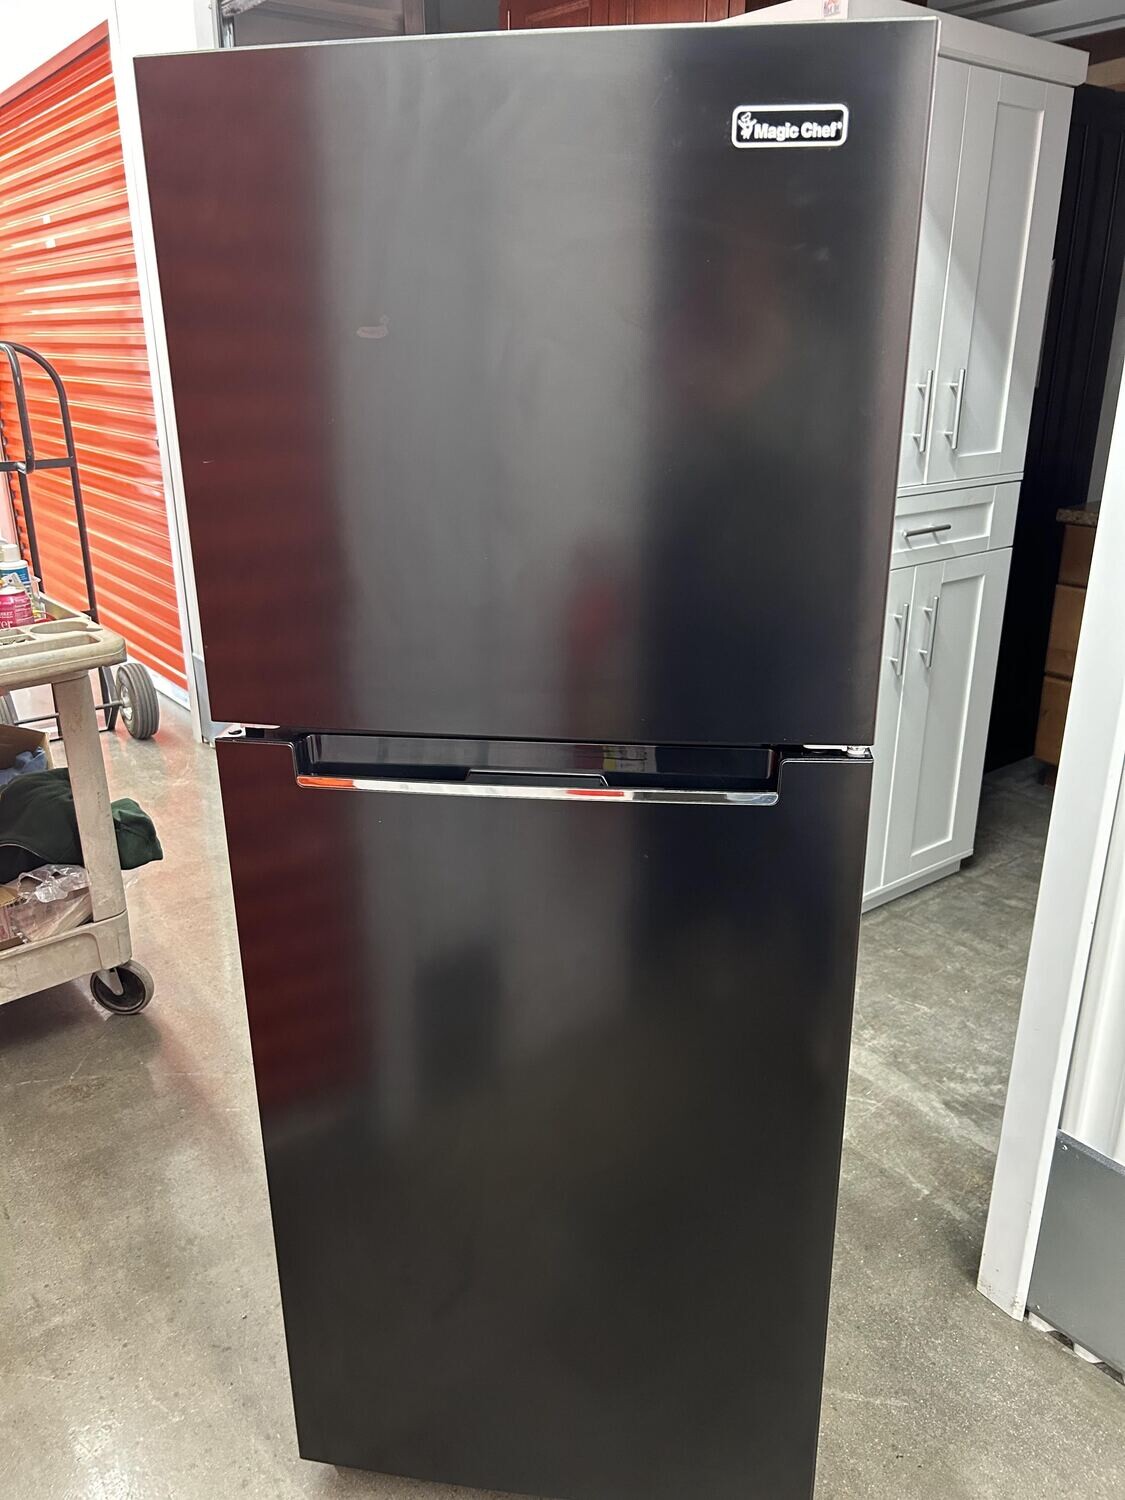 ** Black Magic Chef Apartment Size Refrigerator #1172 ** 2 wks. to sell, full price